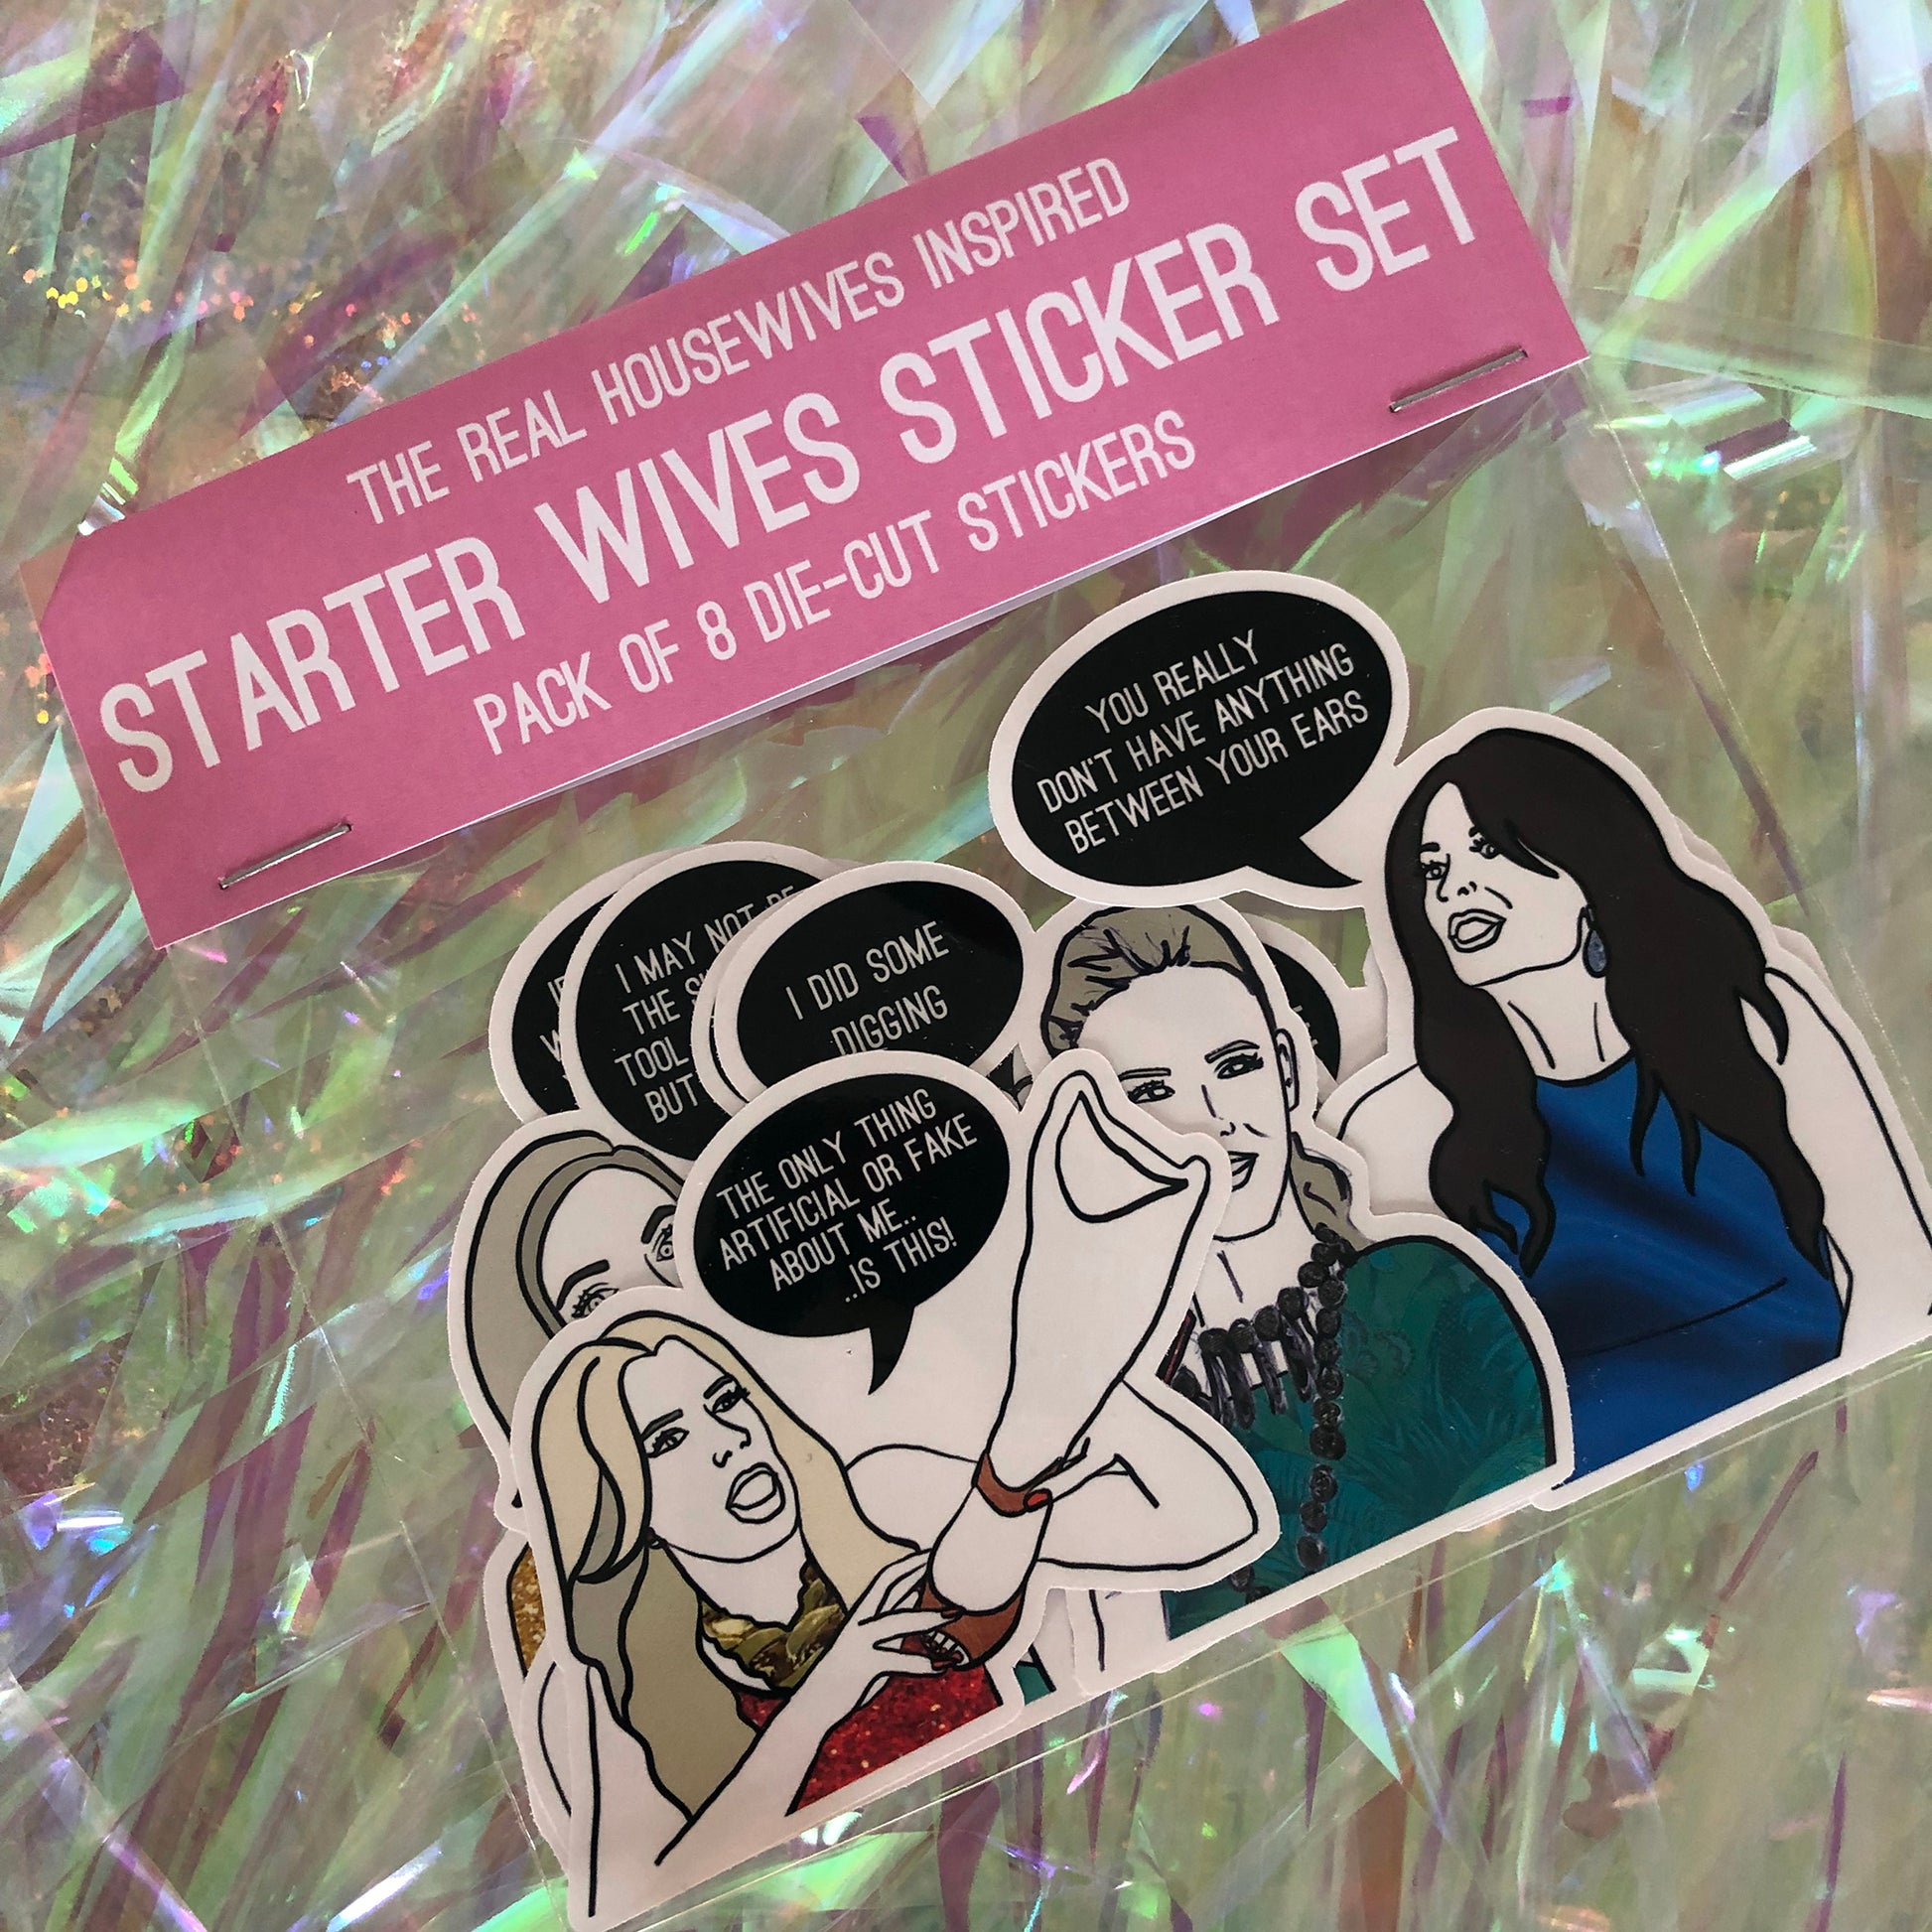 Image shows a sticker pack inspired by The Real Housewives